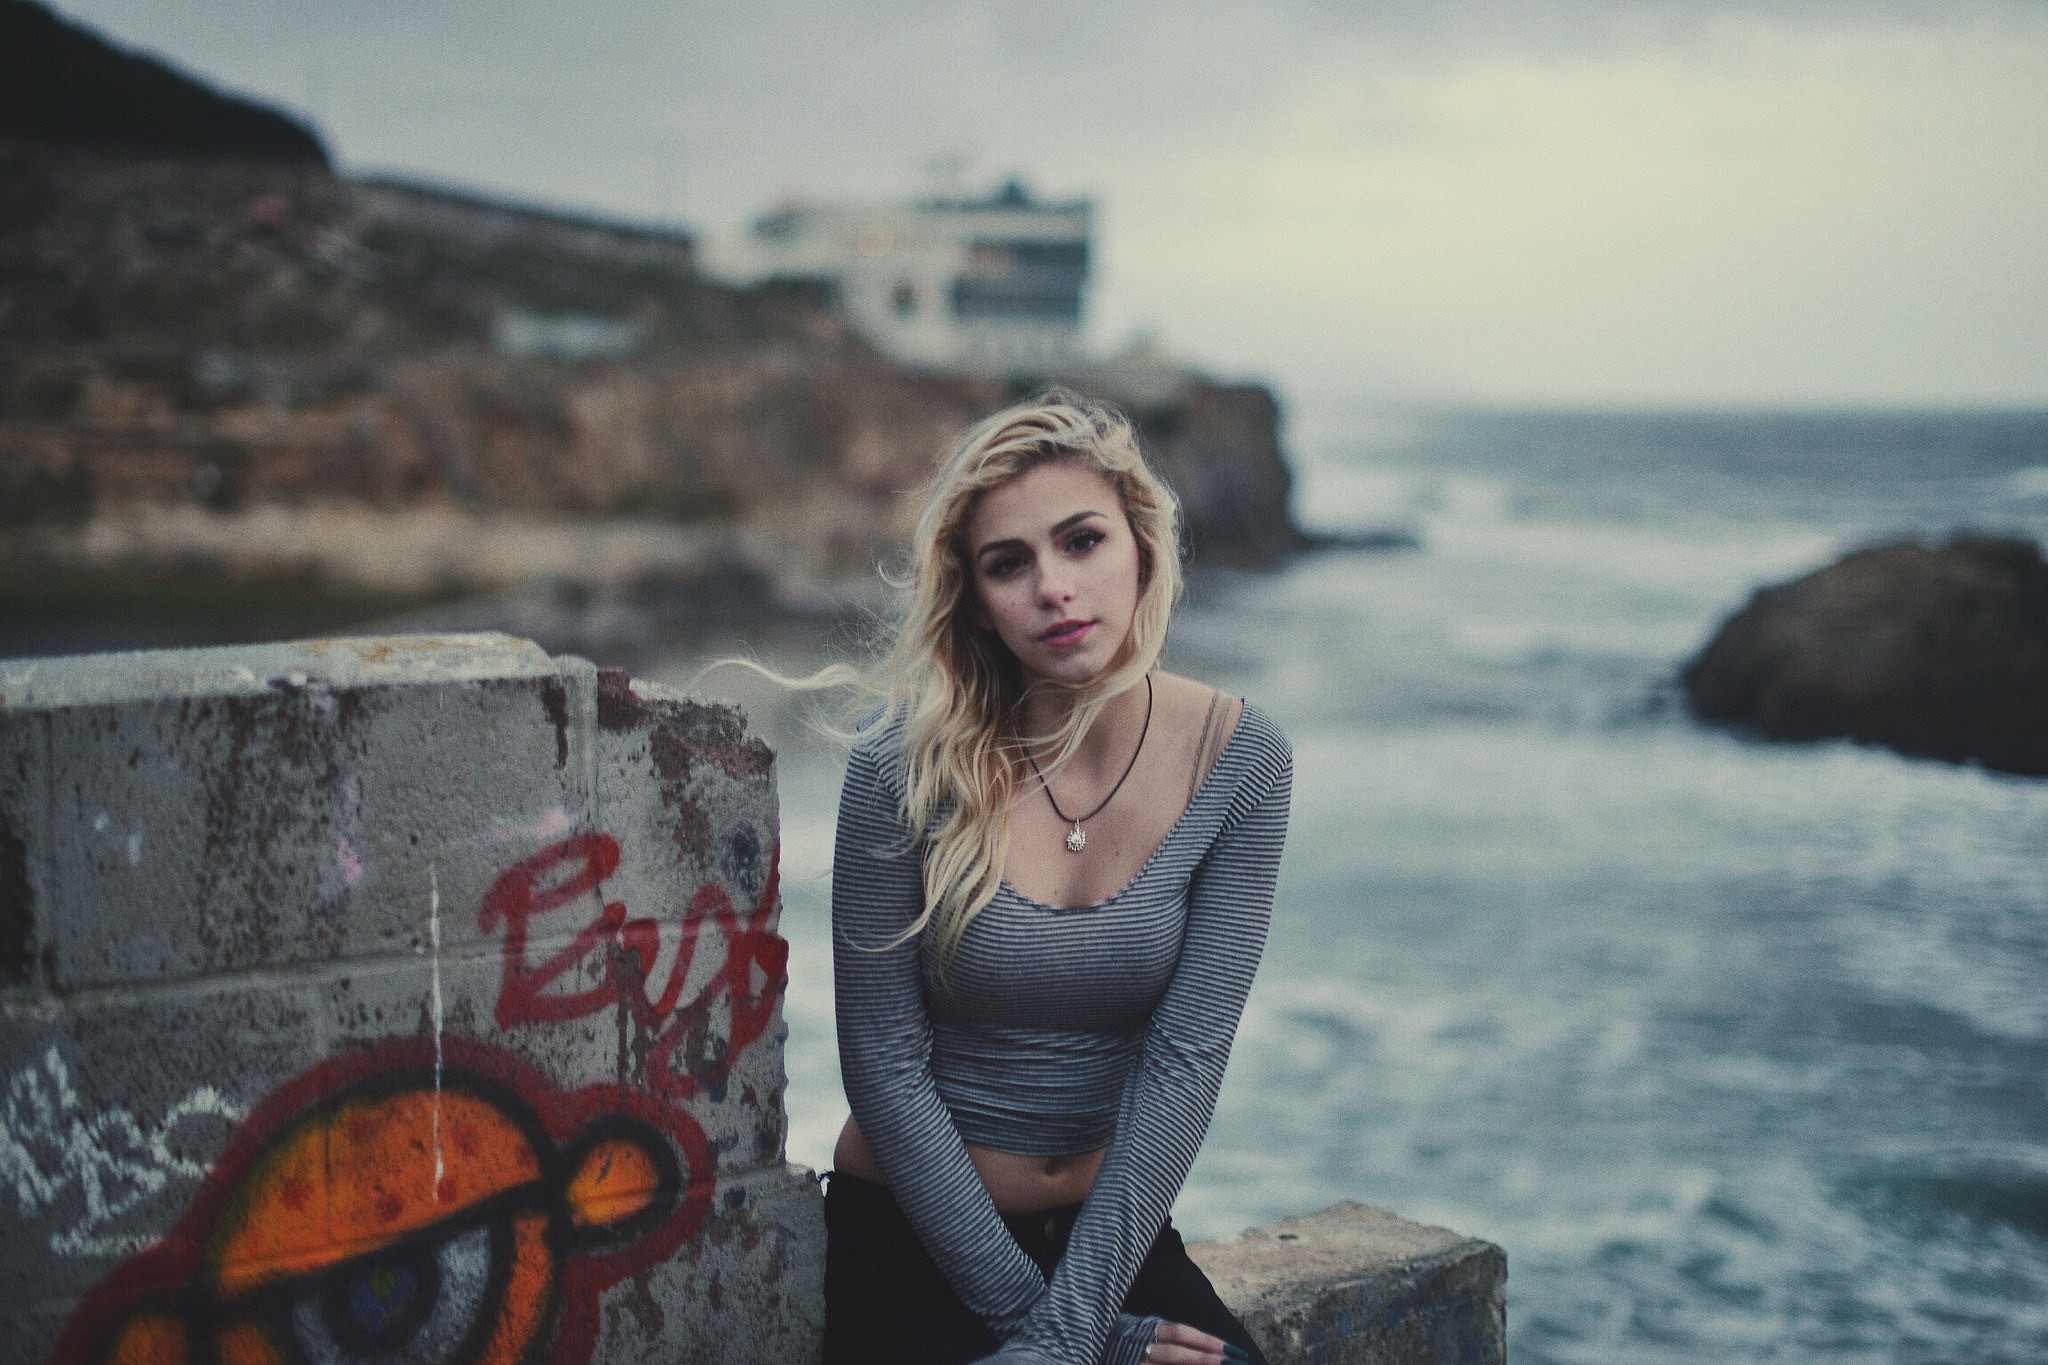 People 2048x1365 women blonde looking at viewer windy sitting water women outdoors graffiti striped clothing